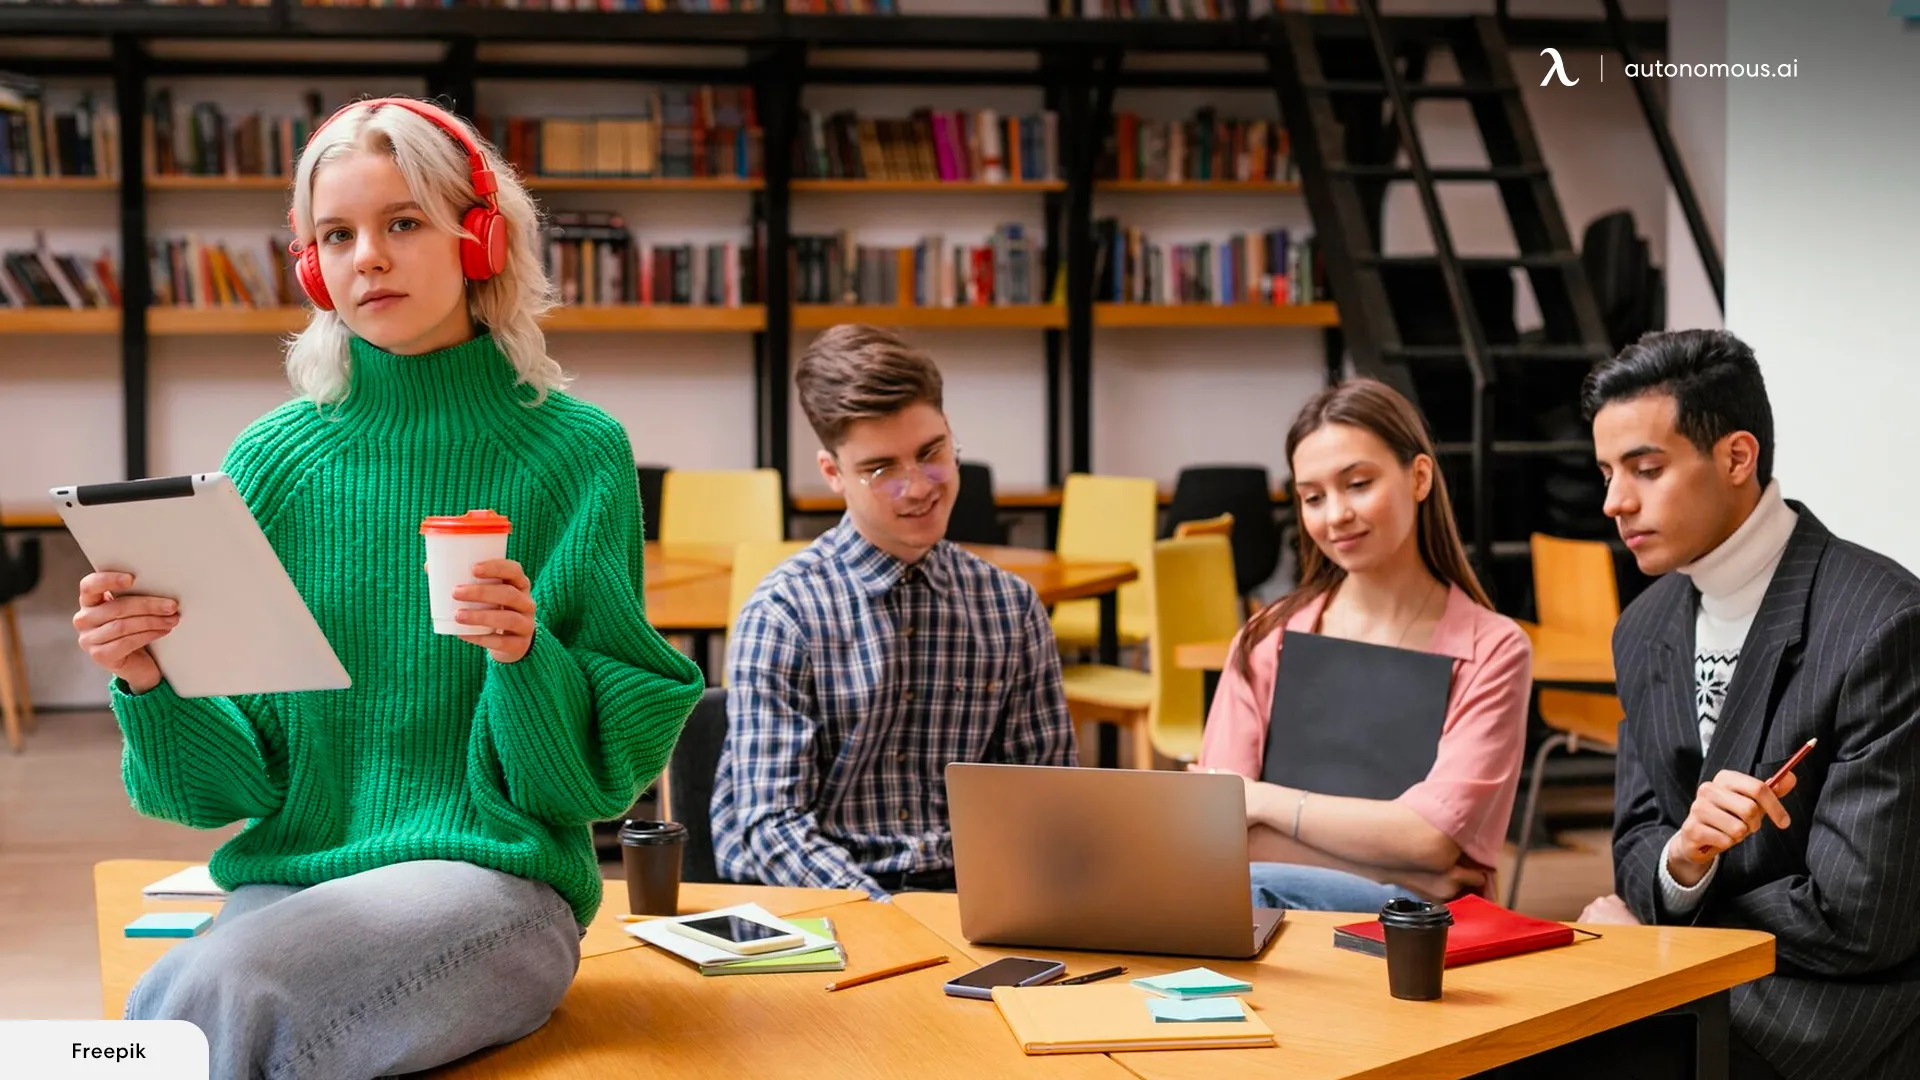 A Guide to Understand Gen Z in the Workplace and New Office Design Trends